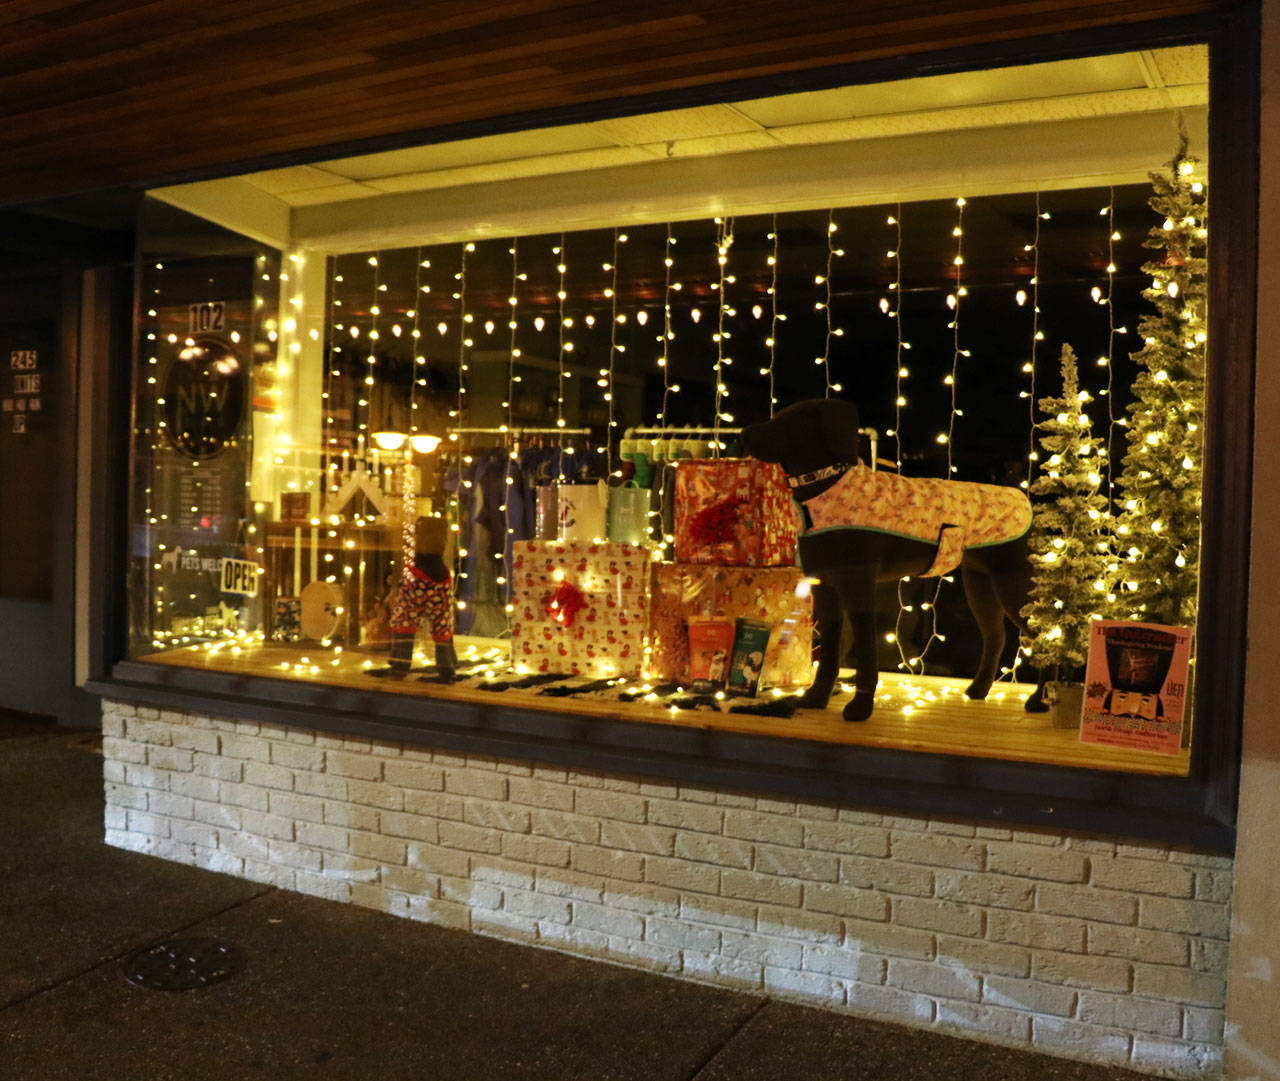 Shops along Front Street have their windows dressed for the holidays.